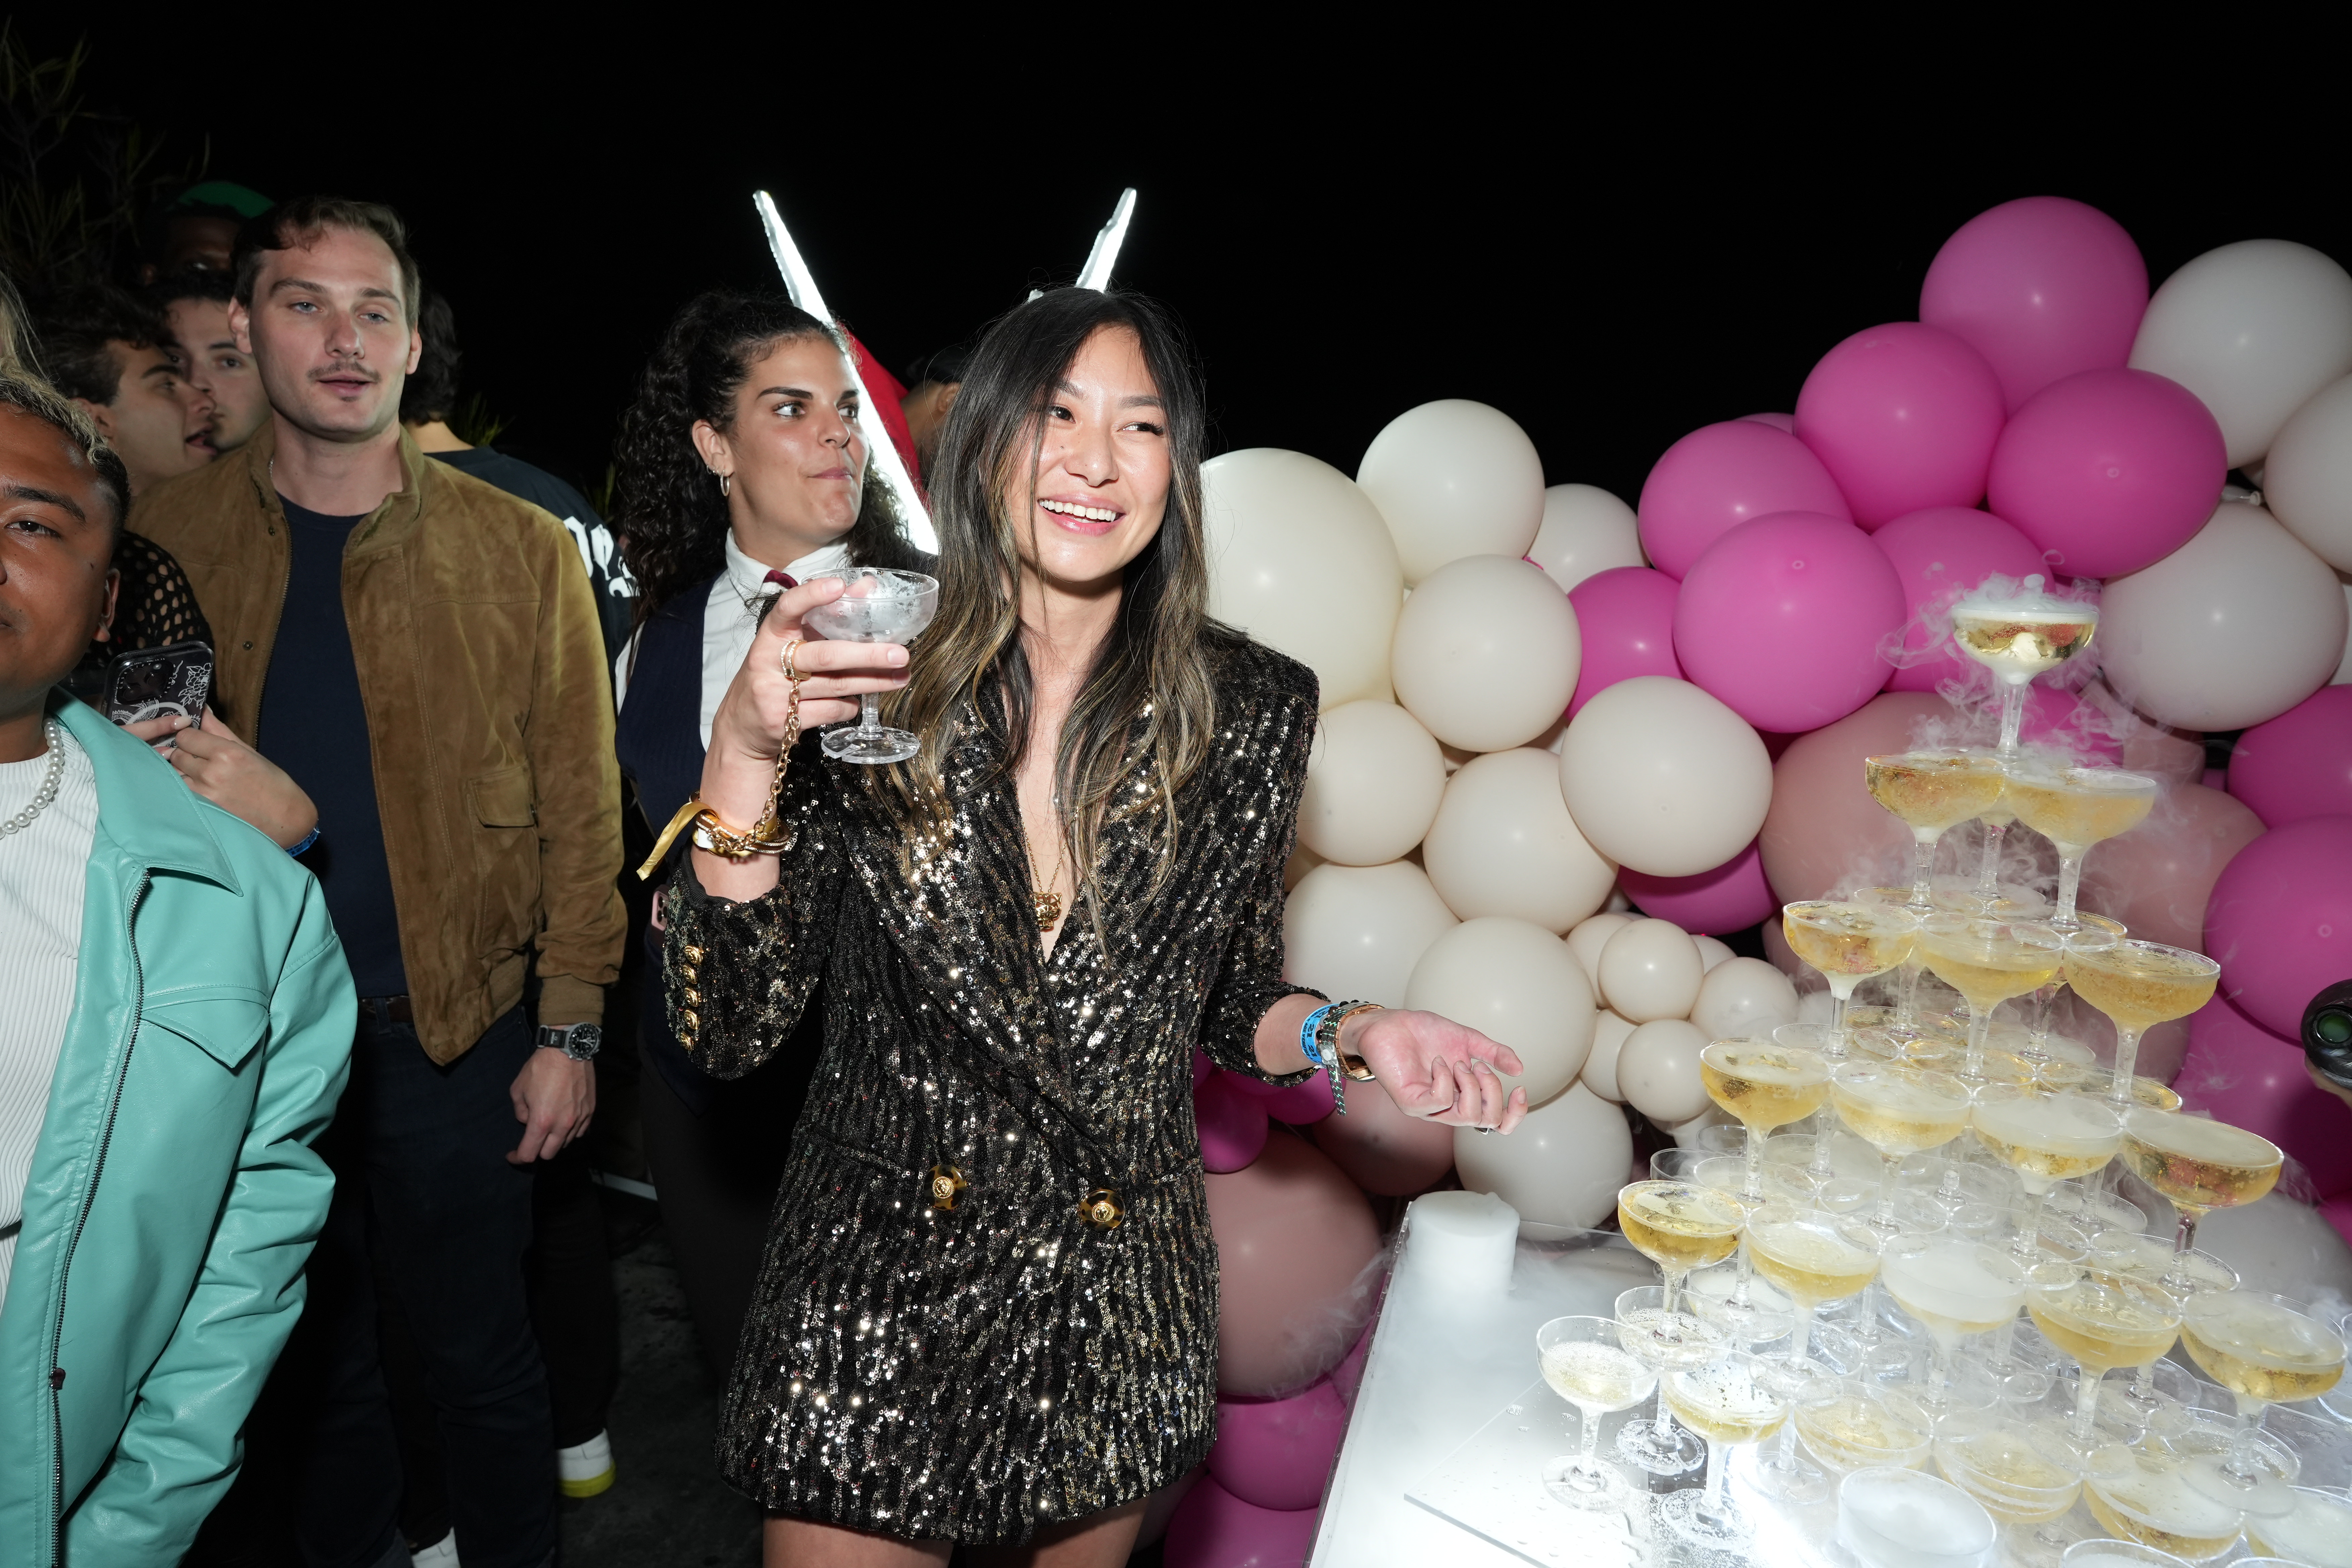 Passes&#39; CEO Lucy Guo celebrates with a champagne toast at her &#39;Lucypalooza&#39; birthday festival, presented by Le Bon Argent By Floyd Mayweather, sponsored by Flex &amp; Betr on October 12, in Los Angeles. (Photo by Gonzalo Marroquin/Getty Images)